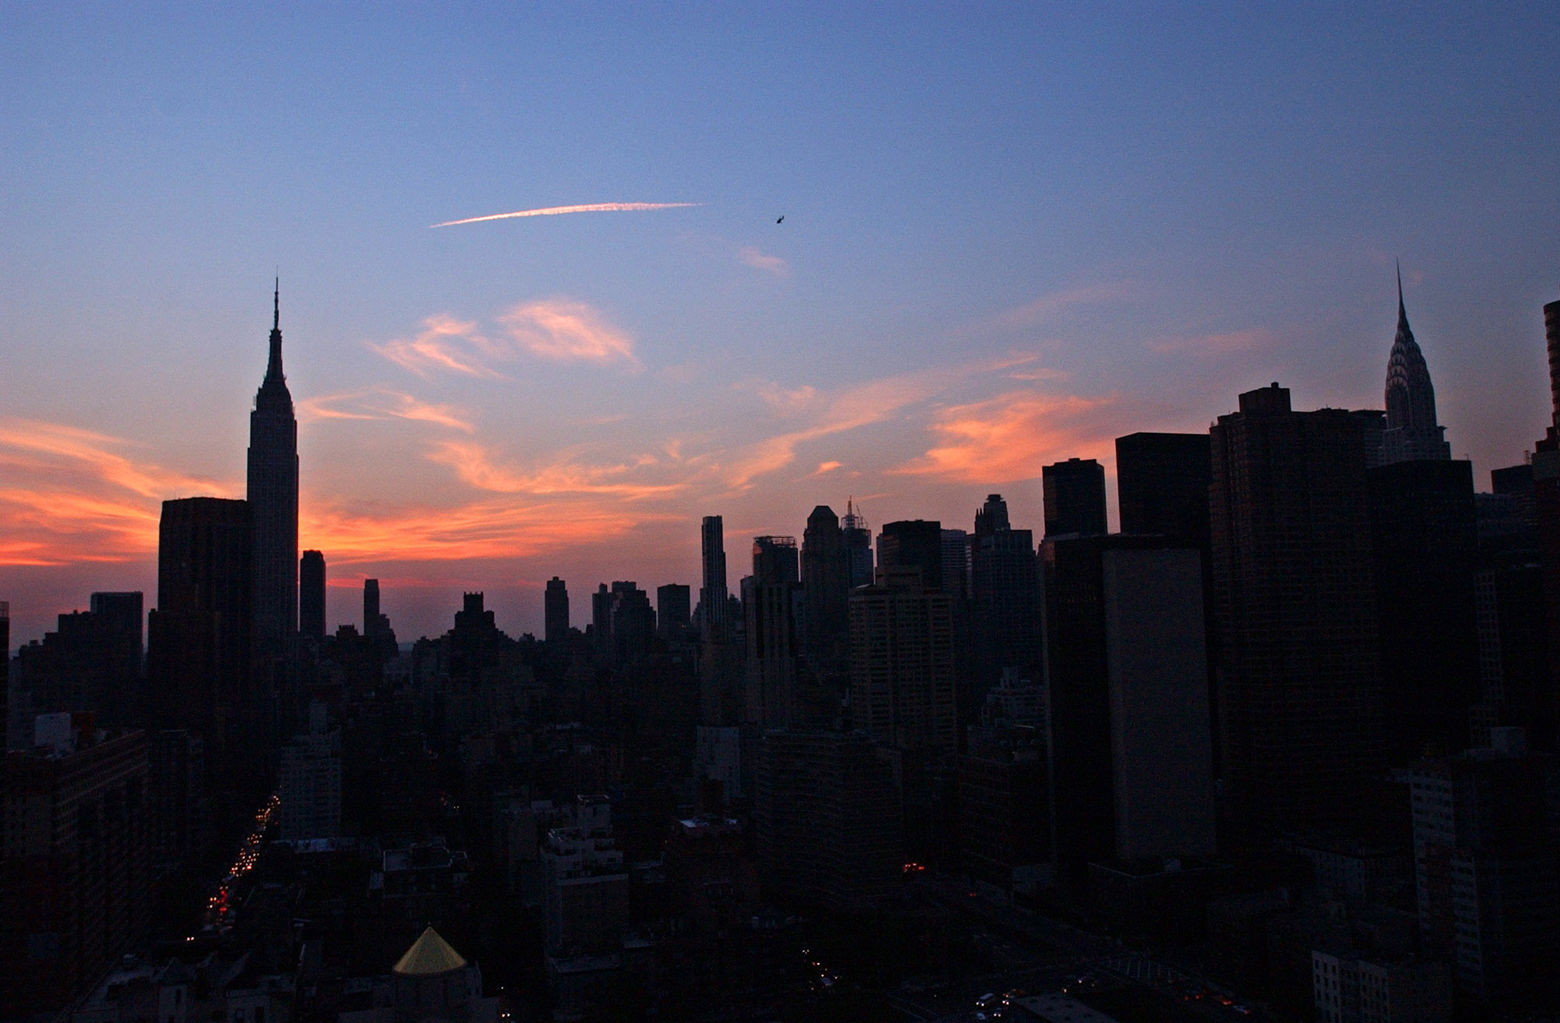 The New York City skyline is shown Thursday, Aug. 14, 2003. A massive power outage struck the eastern United States and parts of Canada on Thursday afternoon, stranding people in sweltering subways and sending office workers streaming into the streets in 90-degree heat. (AP Photo/Frank Franklin II)